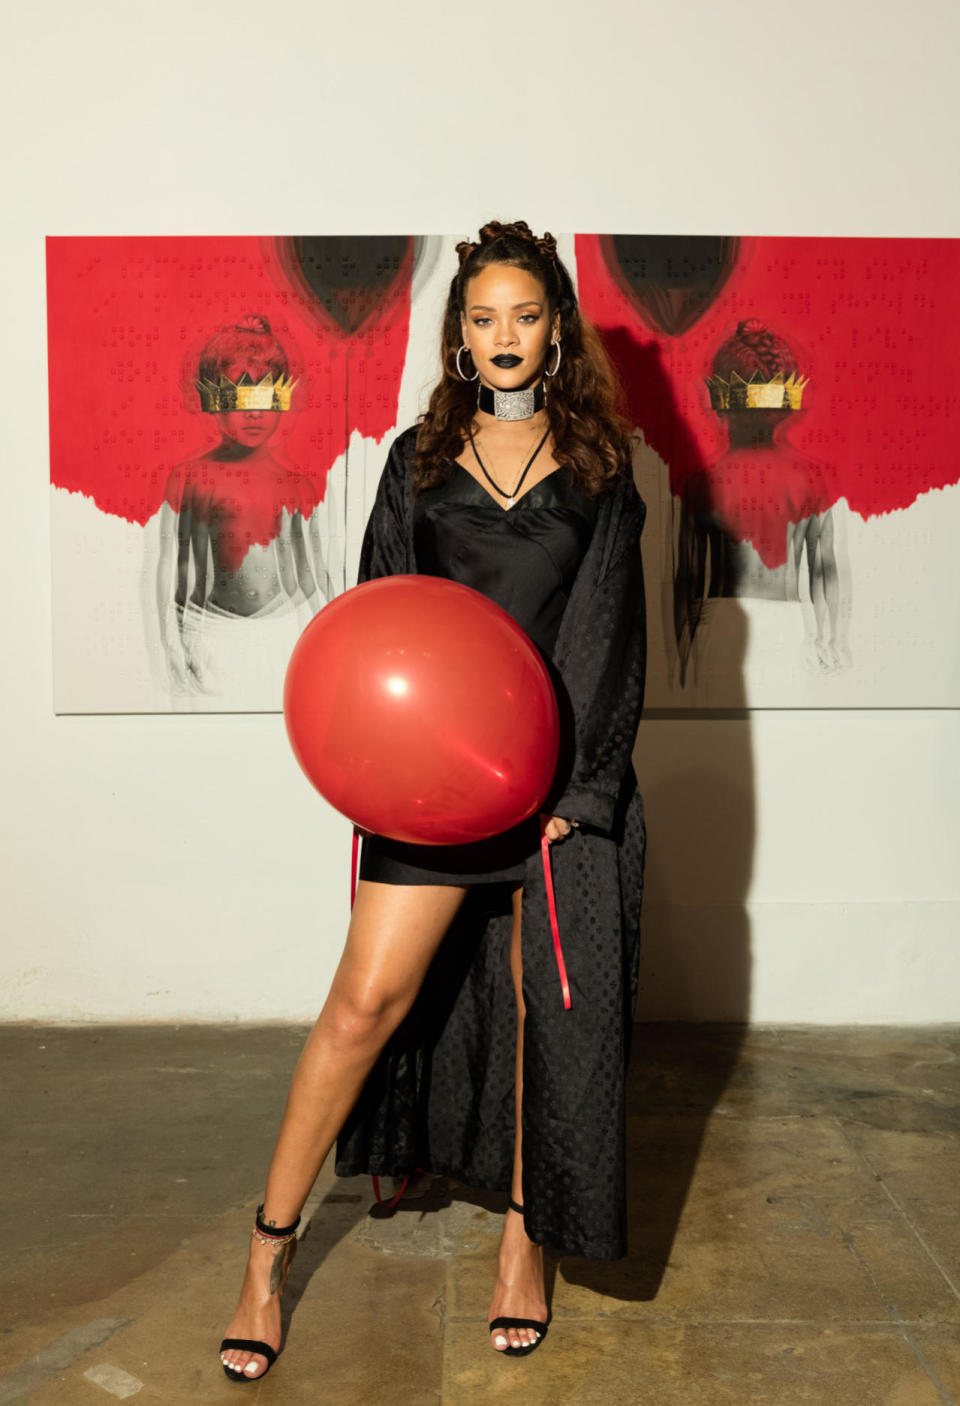 Rihanna wears a black slip dress and robe to unveil the album art for ANTI at MAMA Gallery on Oct. 7, 2015 in Los Angeles.